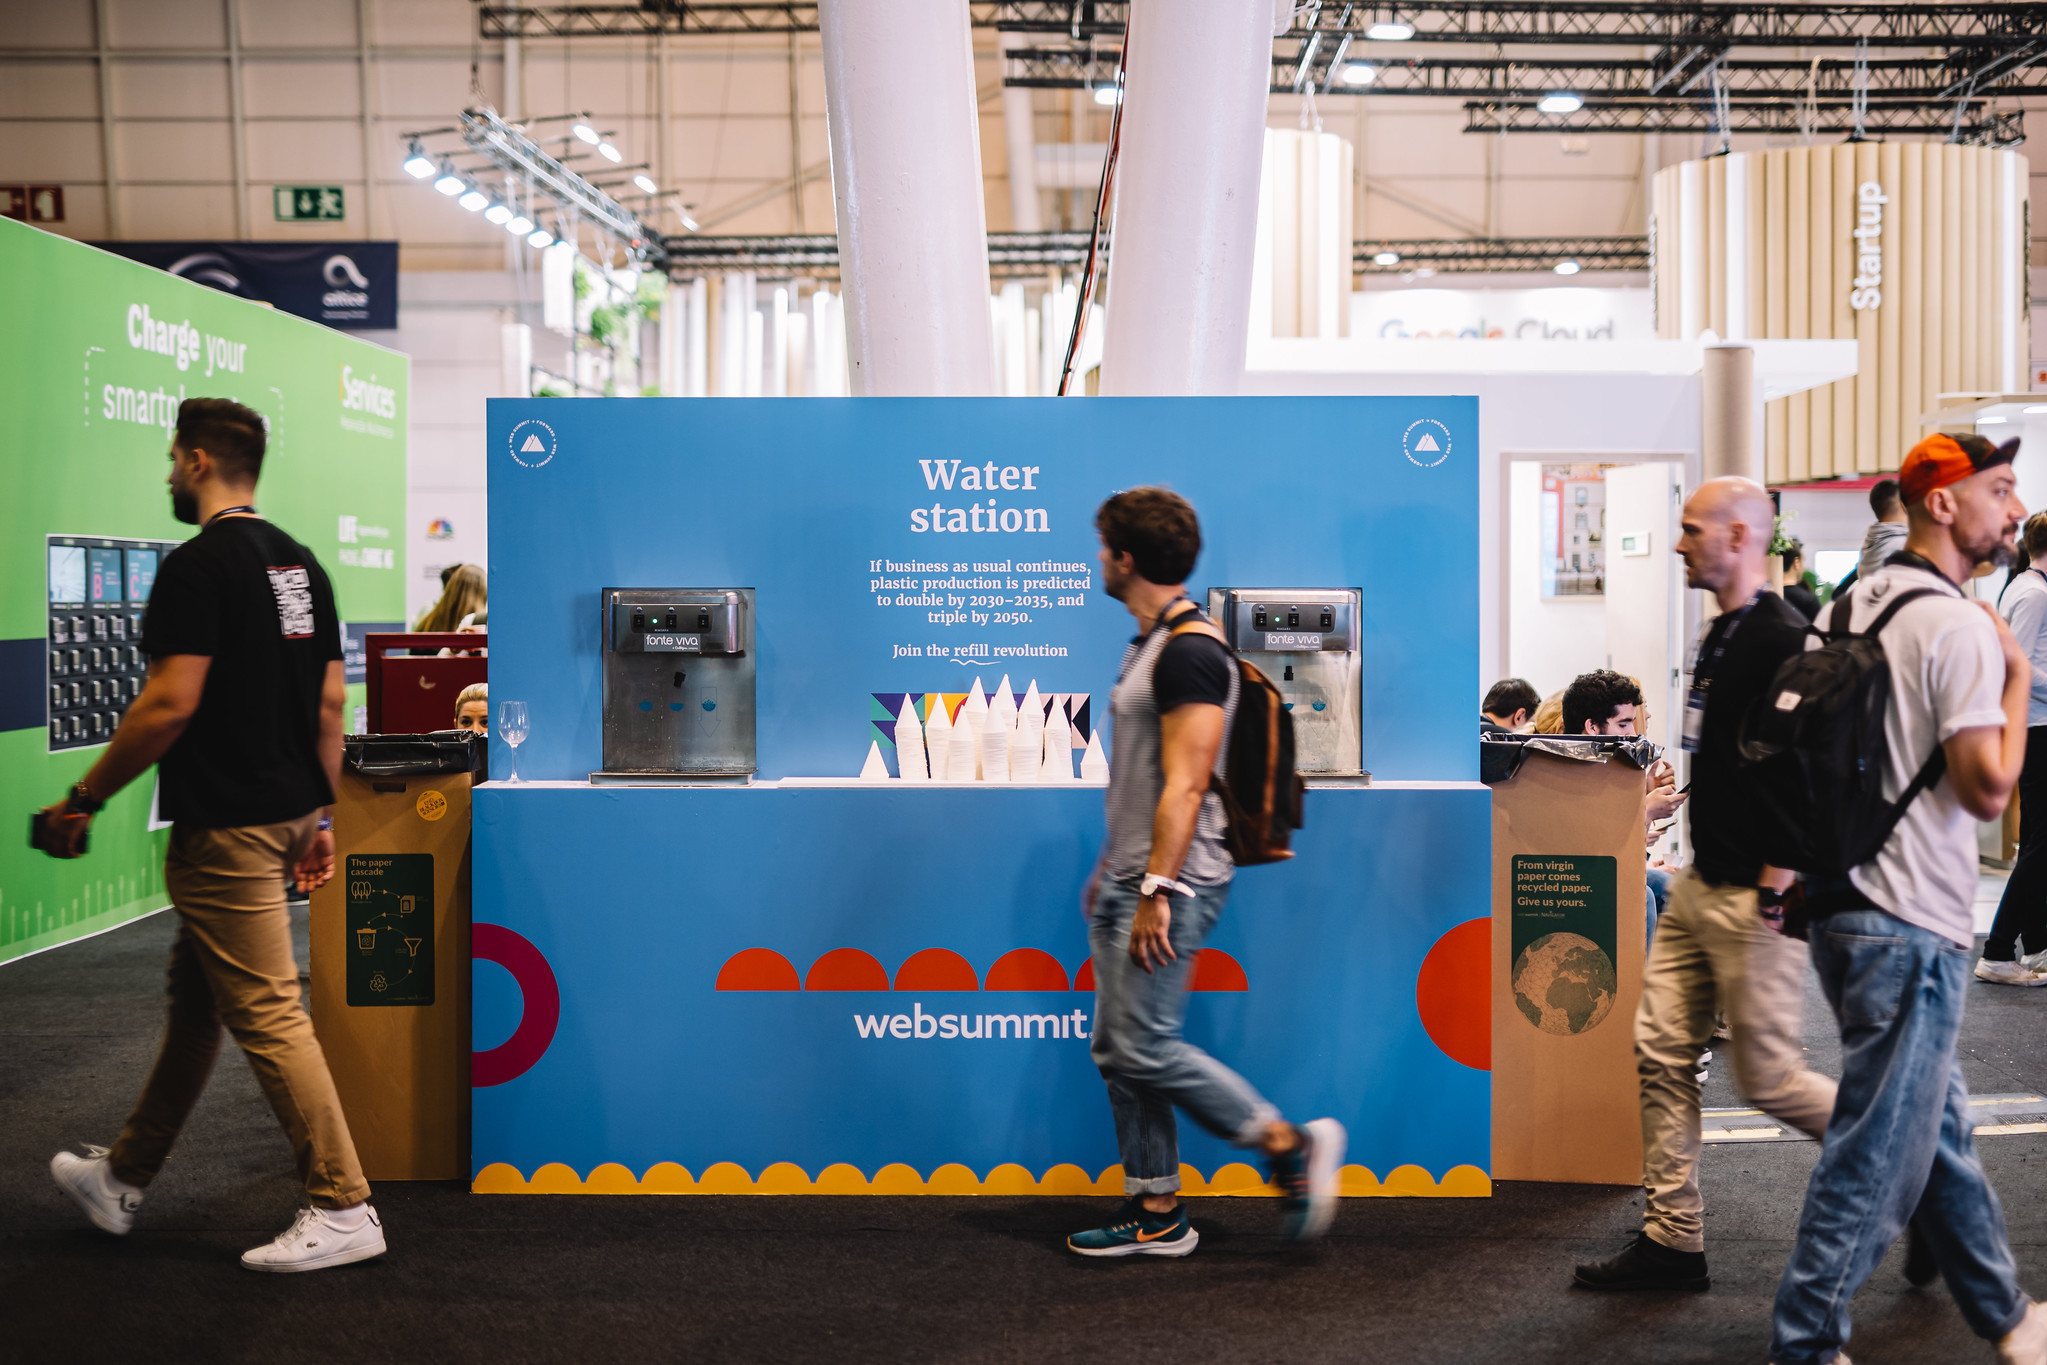 A person walks past a water station with Web Summit branding on it. The water station is on an exhibition floor with high ceilings and industrial lighting.